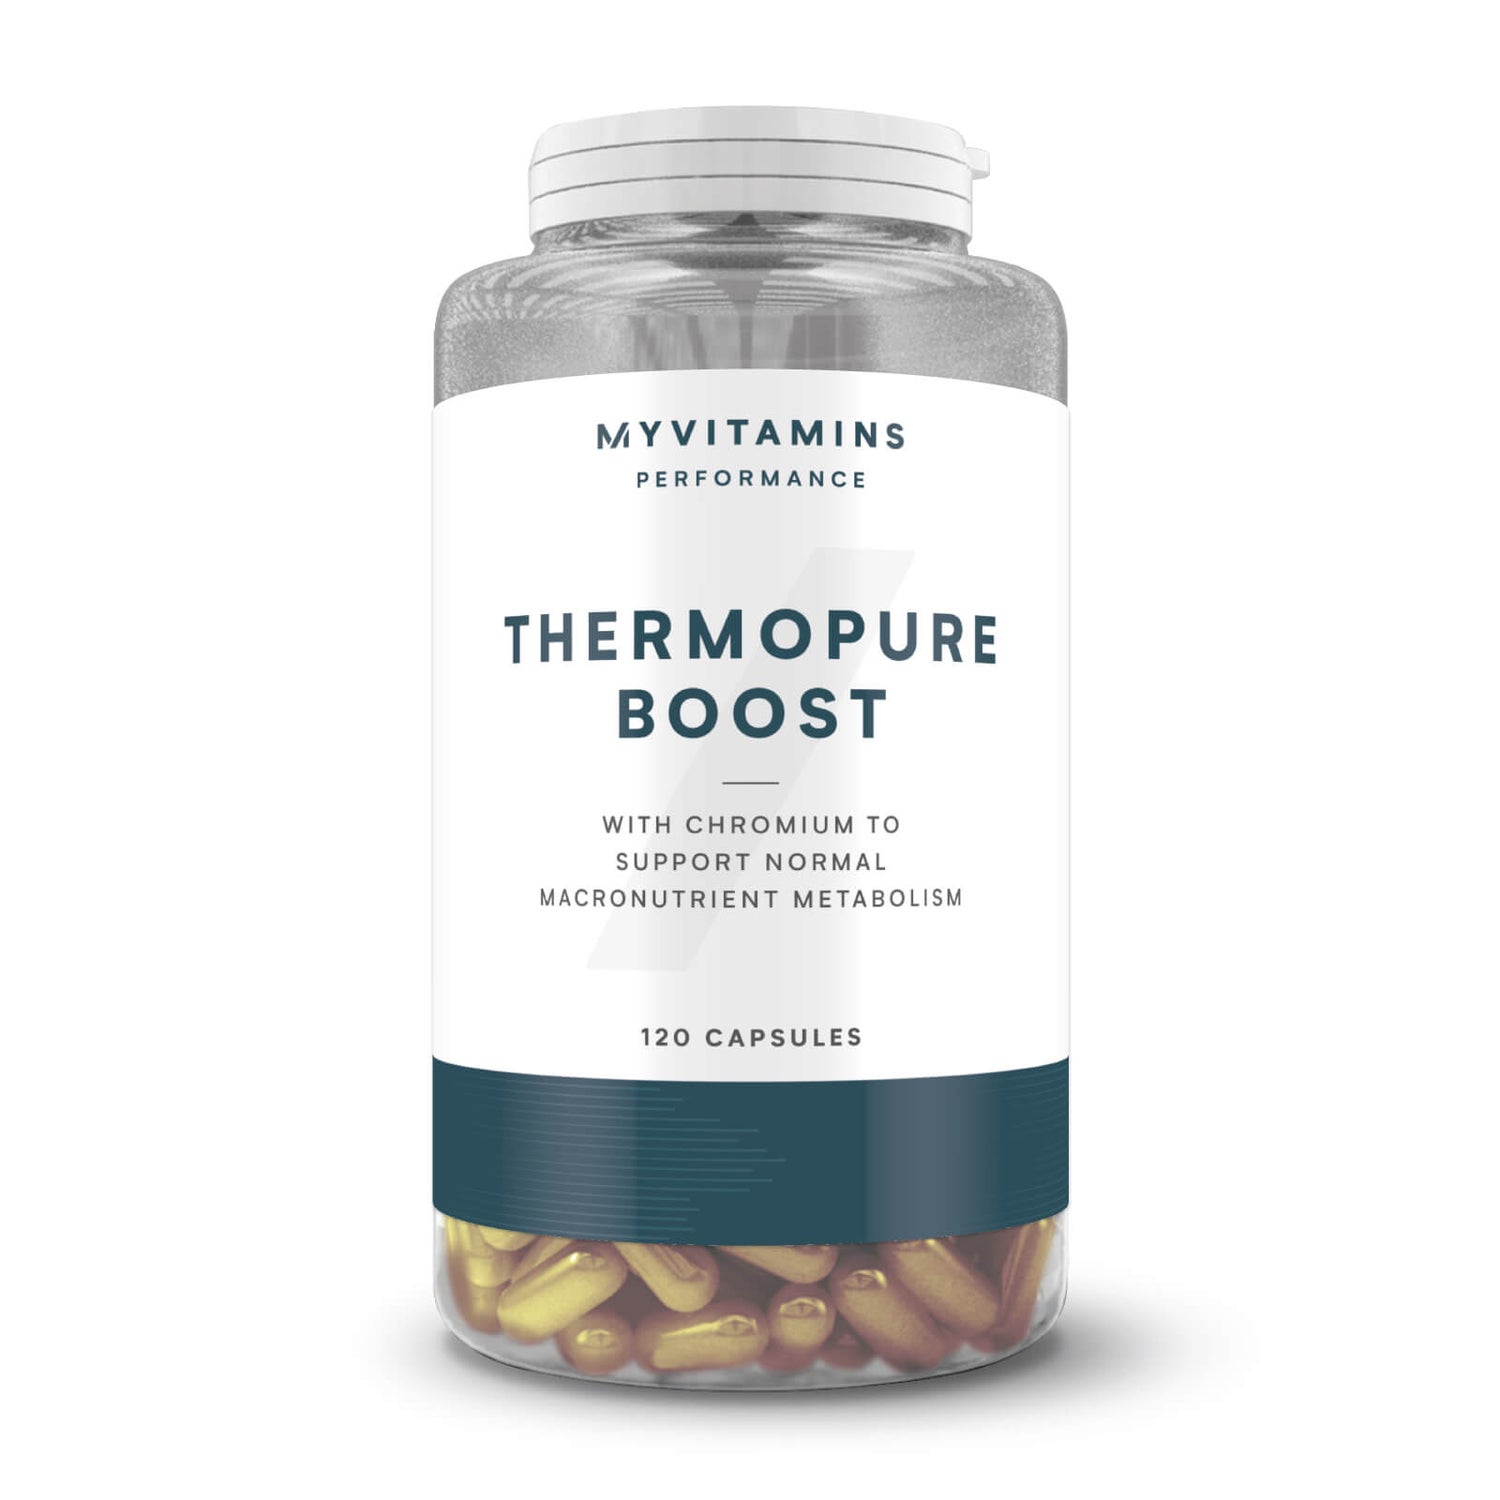 Thermopure Boost